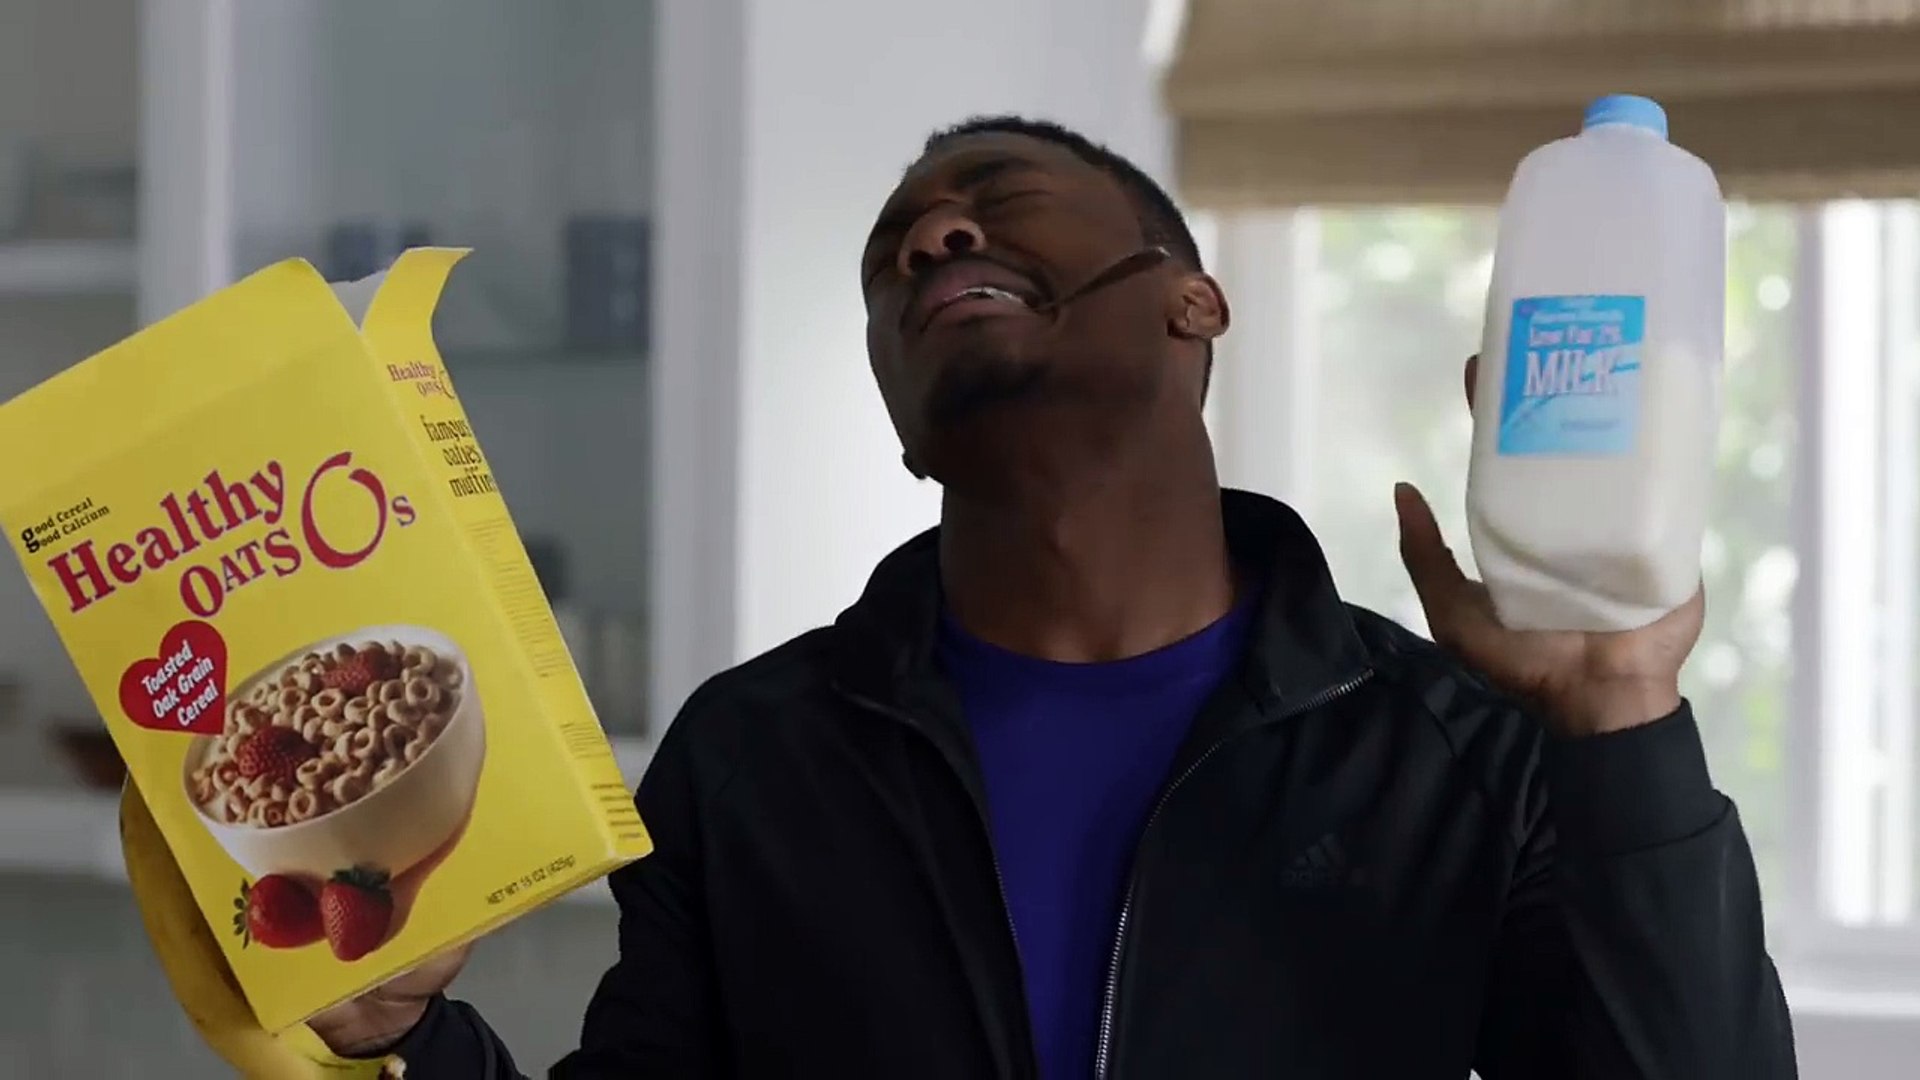 Stefon Diggs Tries Eating Cereal - GEICO - Dailymotion Video